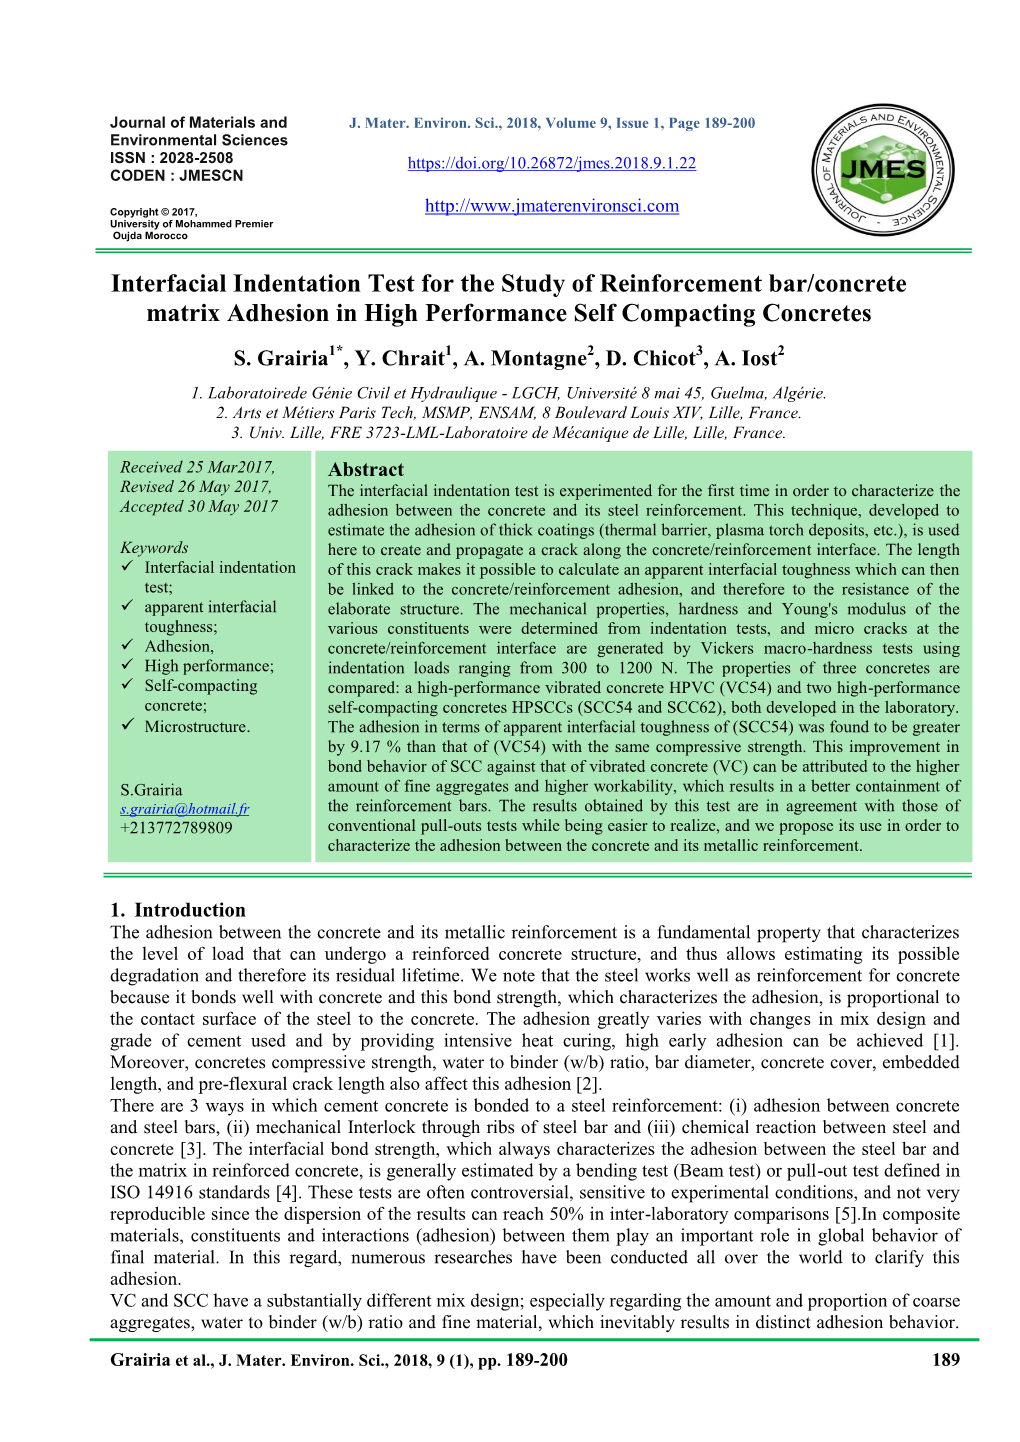 Interfacial Indentation Test for the Study of Reinforcement Bar/Concrete Matrix Adhesion in High Performance Self Compacting